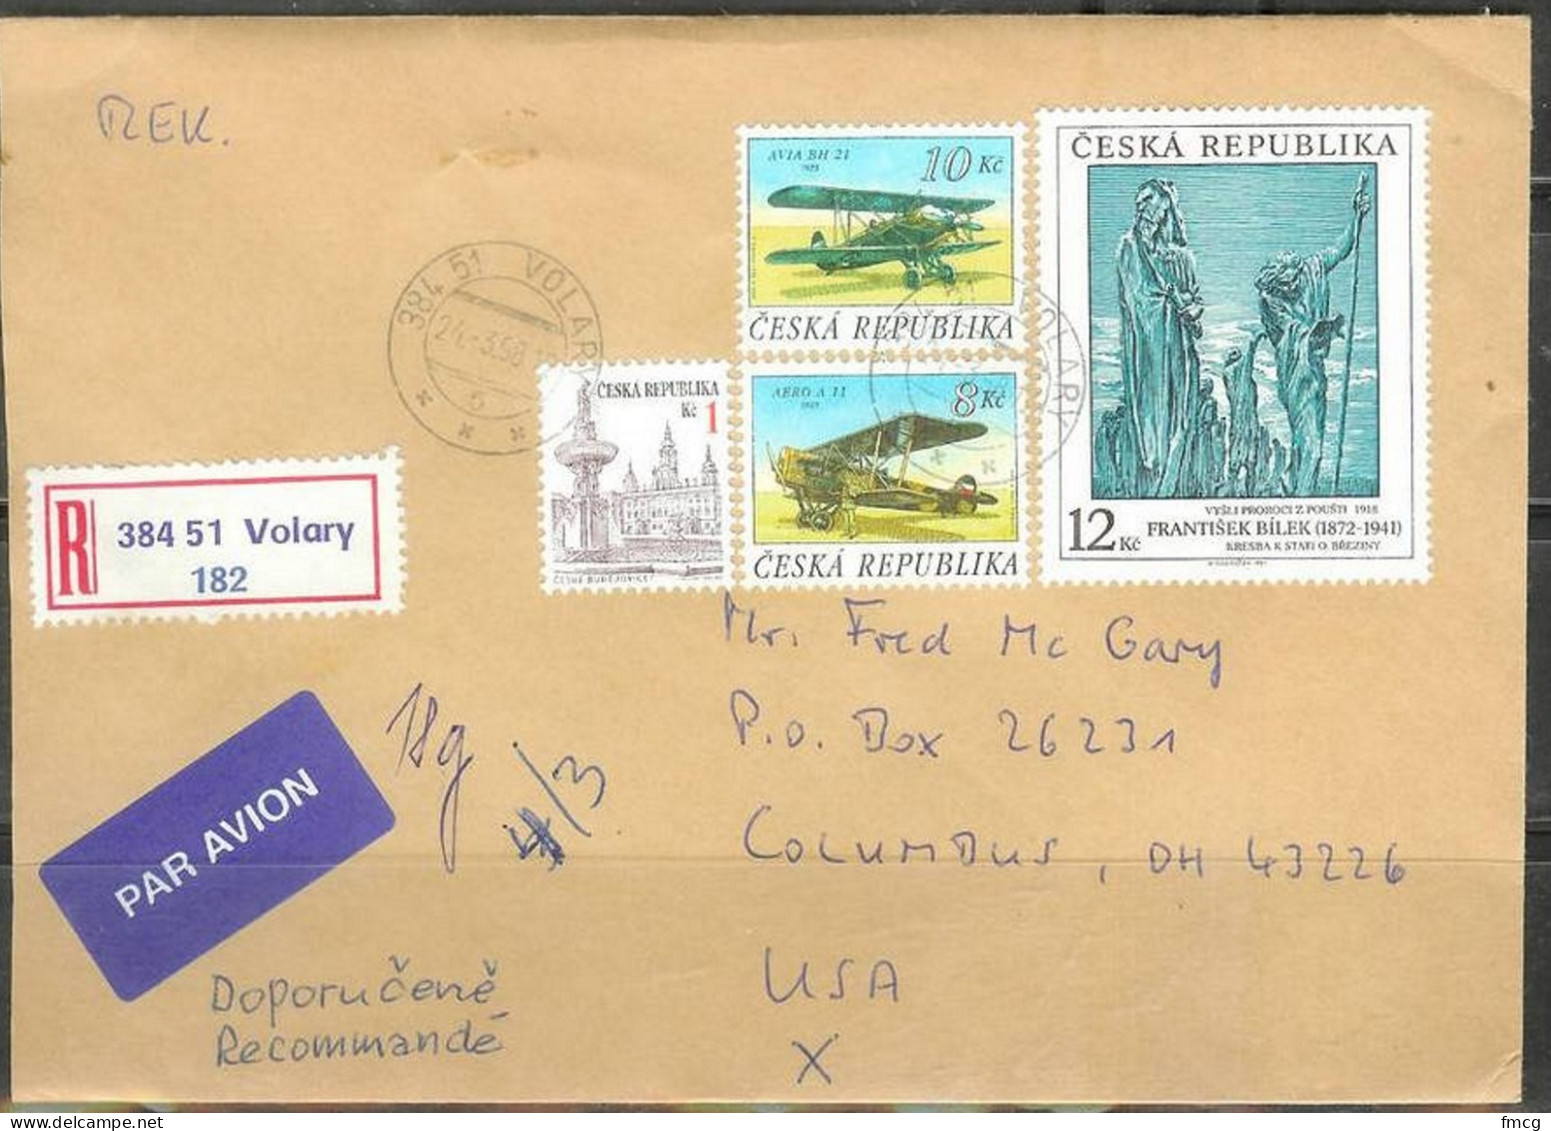 Czech Republic 1998 Bilek Painting And Bi-planes, Registered, Volary To Ohio USA - Lettres & Documents